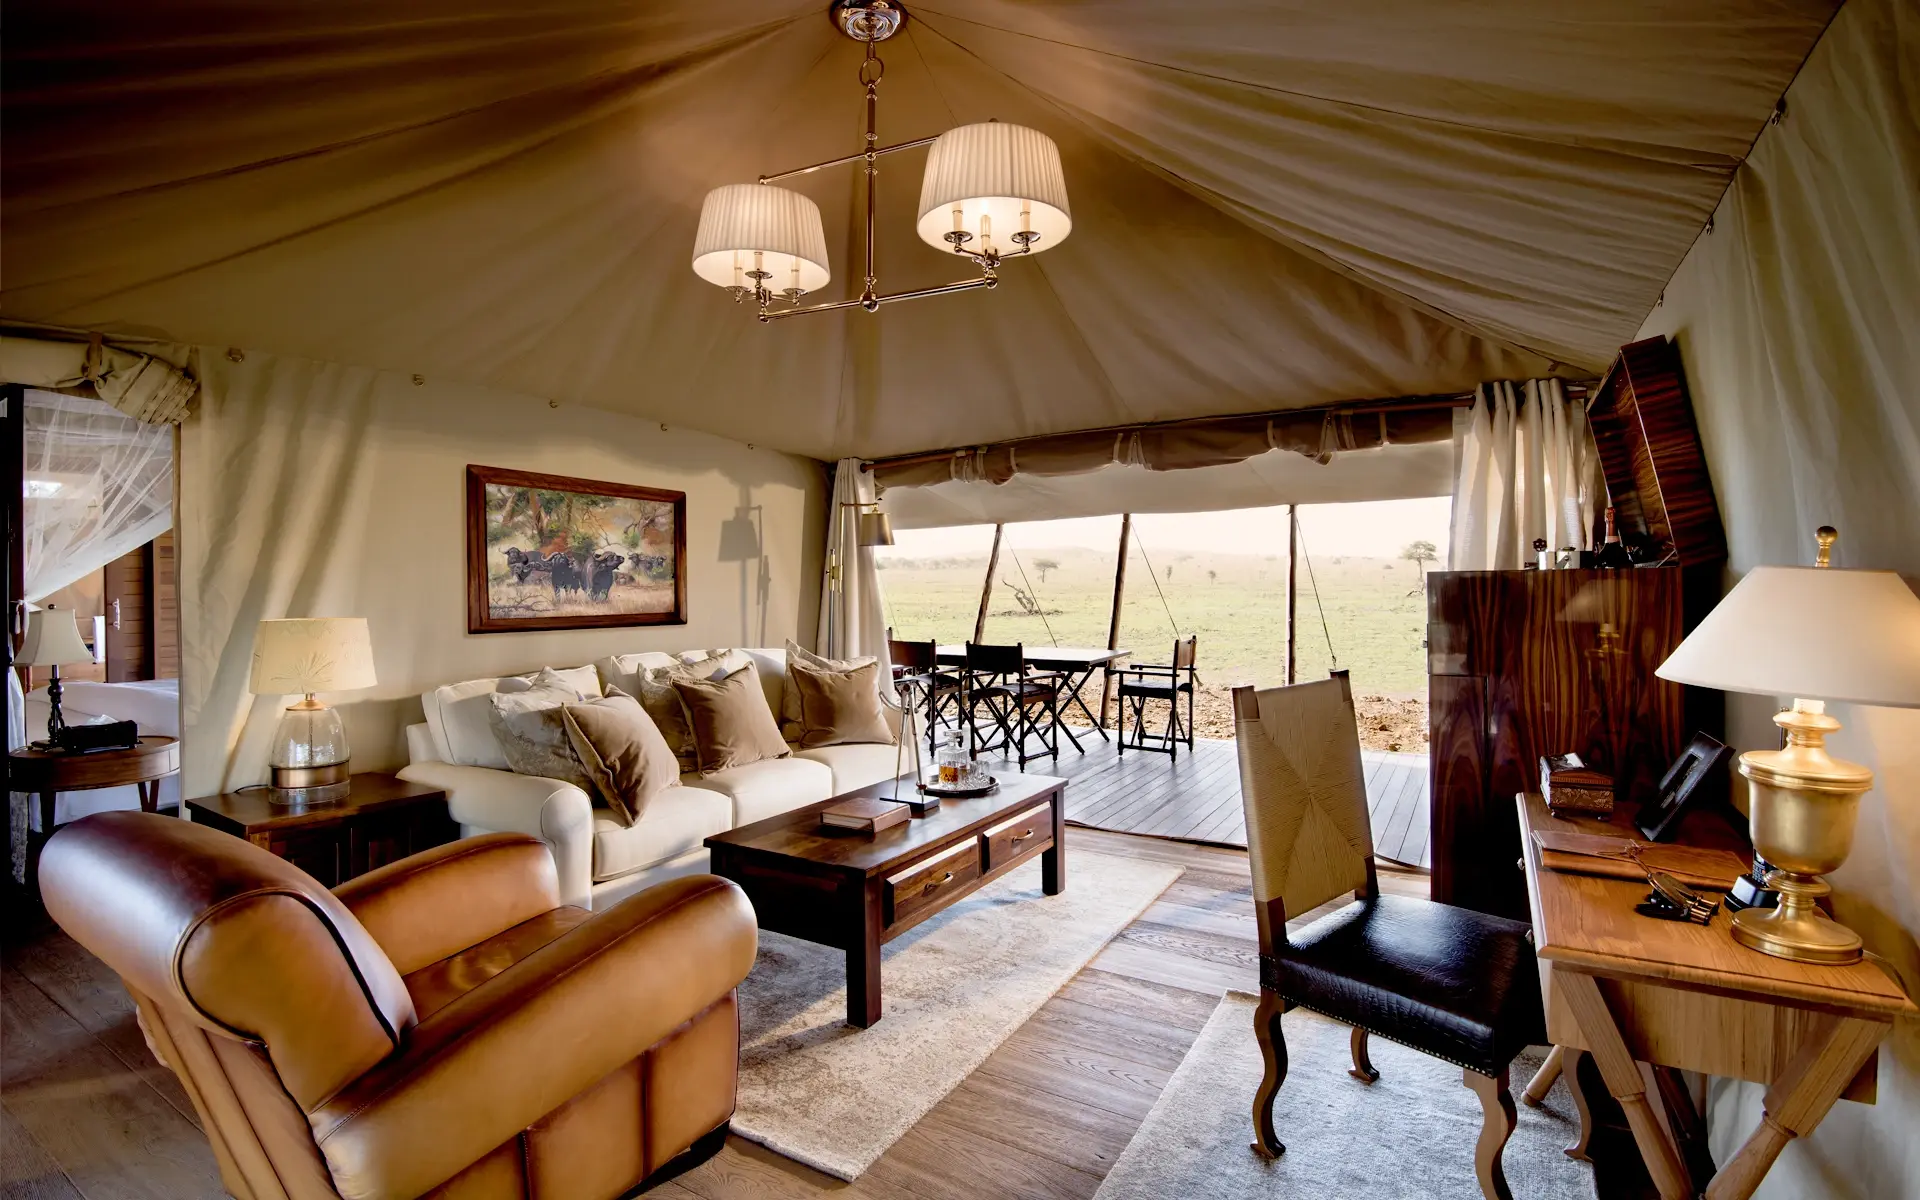 Living room area in the luxury family tent